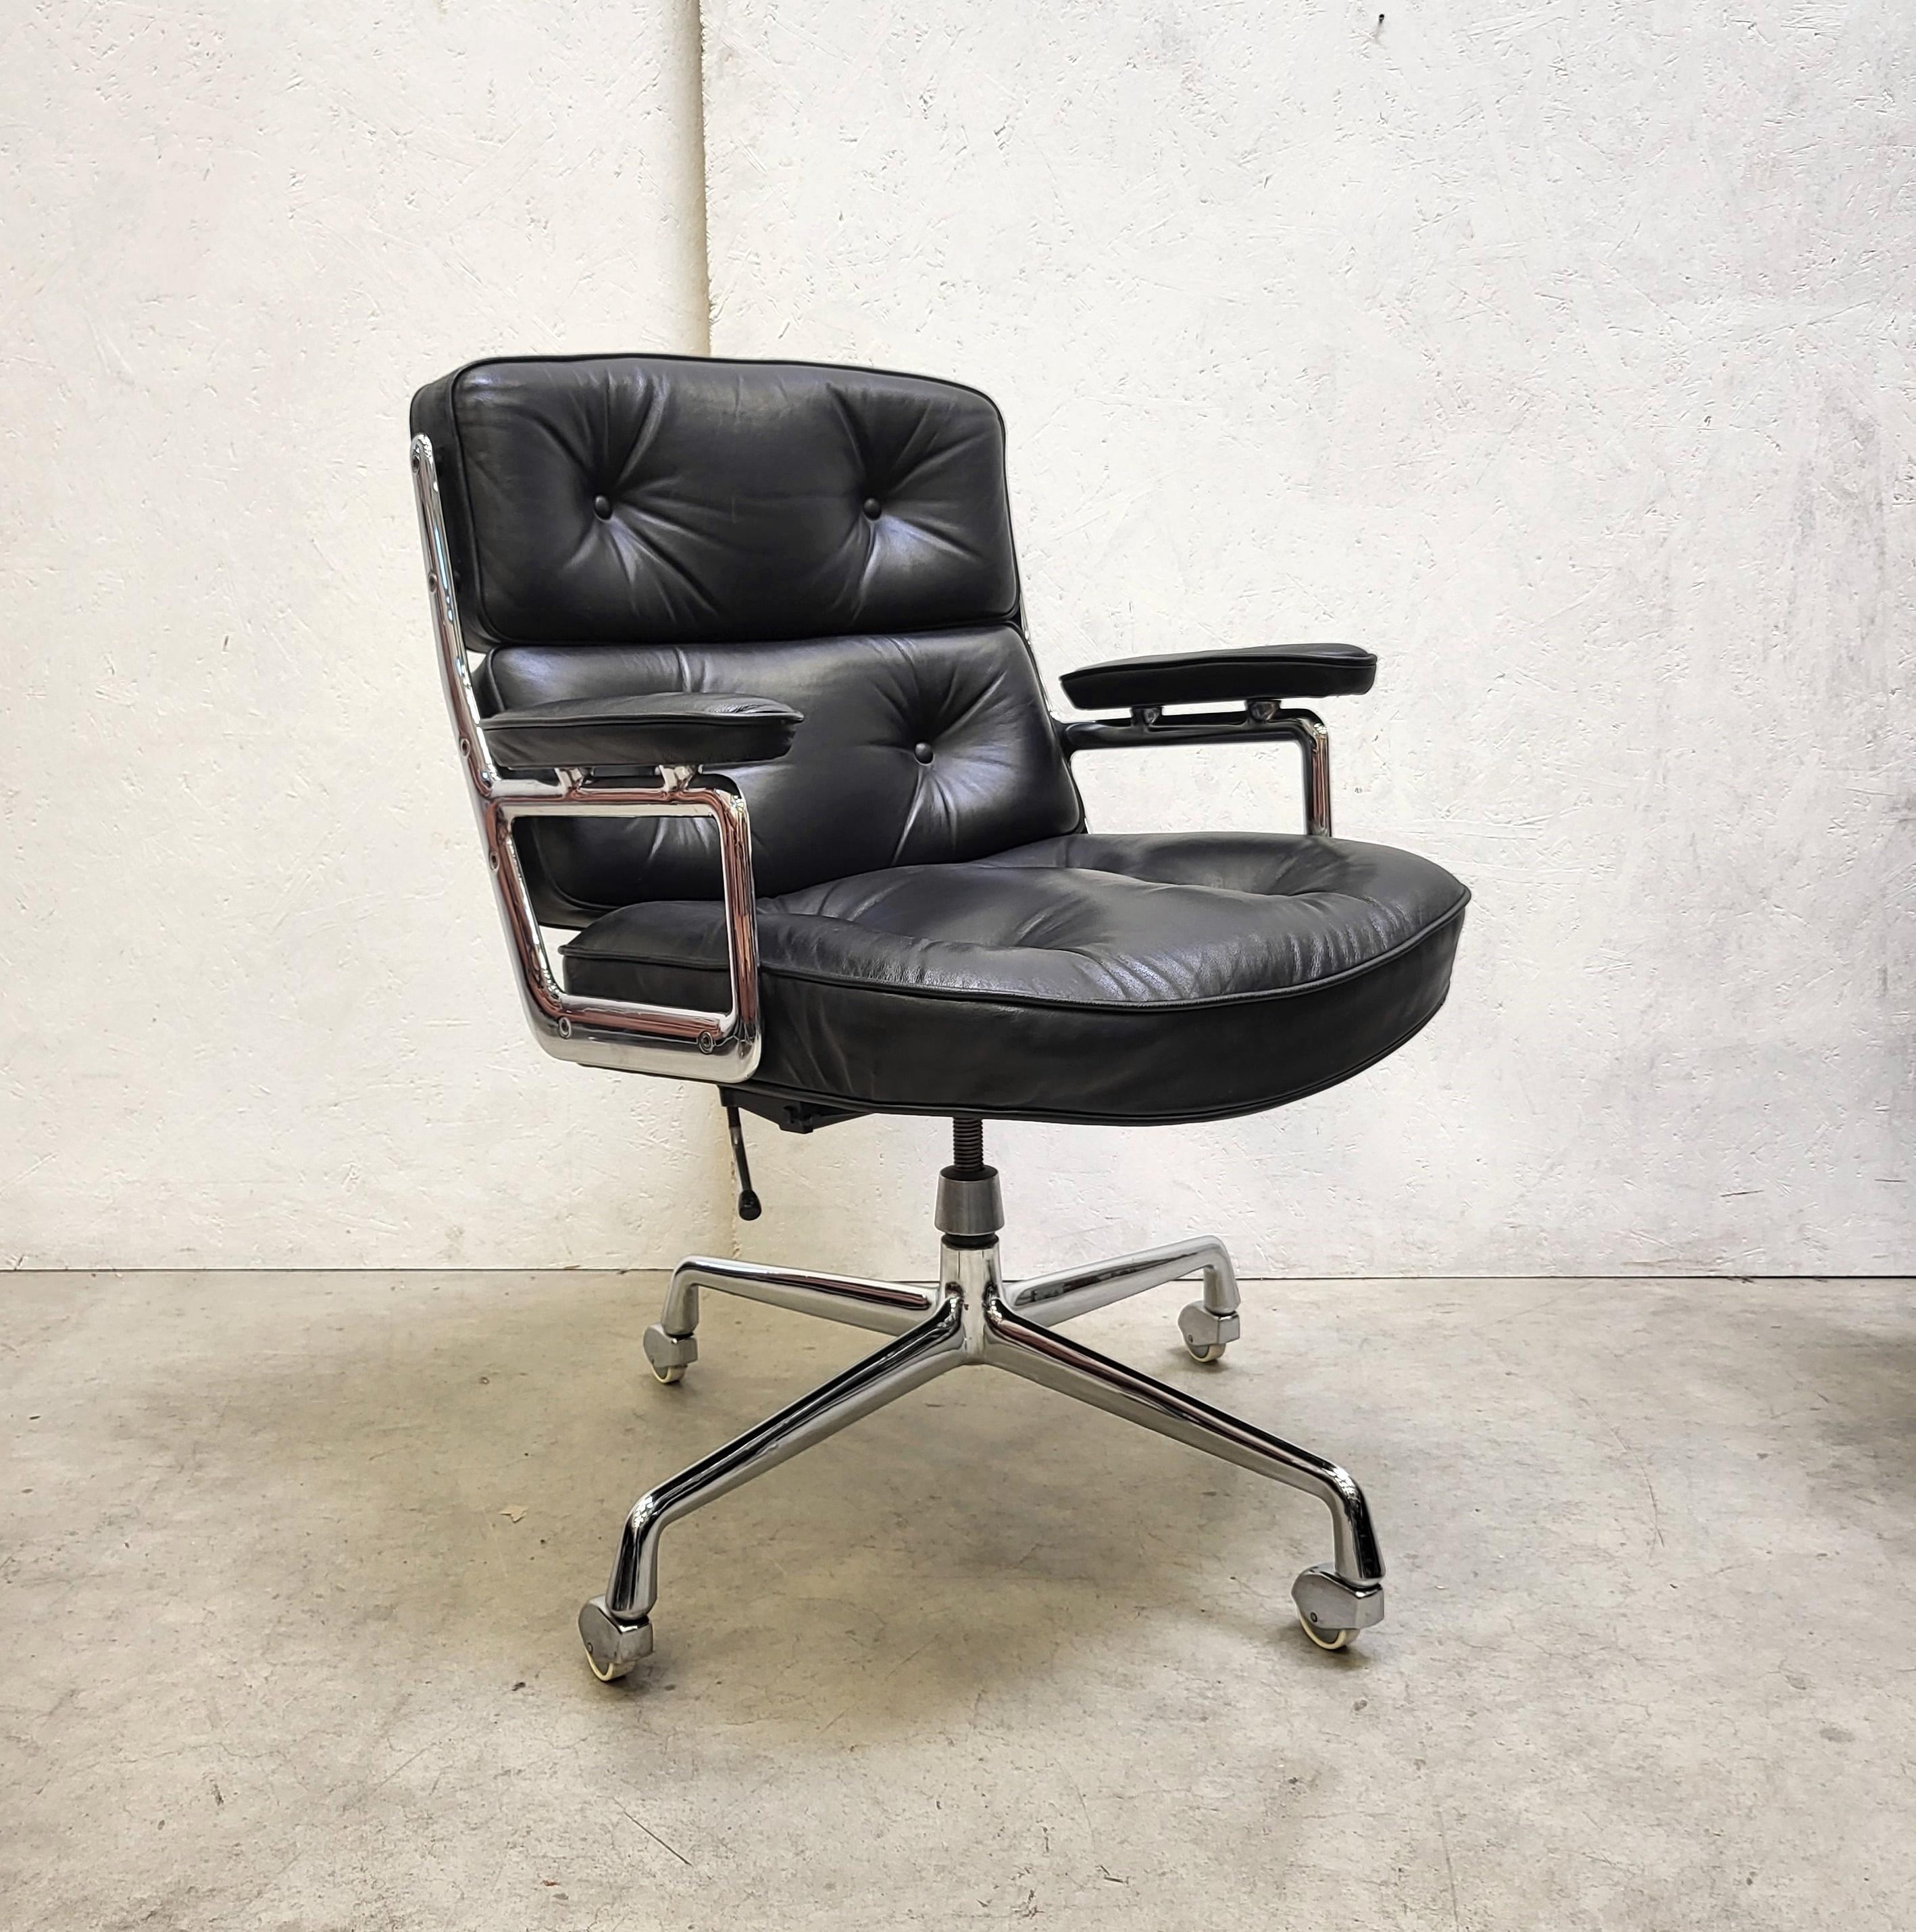 Wonderful black leather Lobby Chair model ES104 produced by Herman Miller/Vitra in the 70s/80s. 
The chair features a chromed aluminium frame on a chromed aluminium base.

The chair features a tilt mechanism and is height adjustable.

Overall the